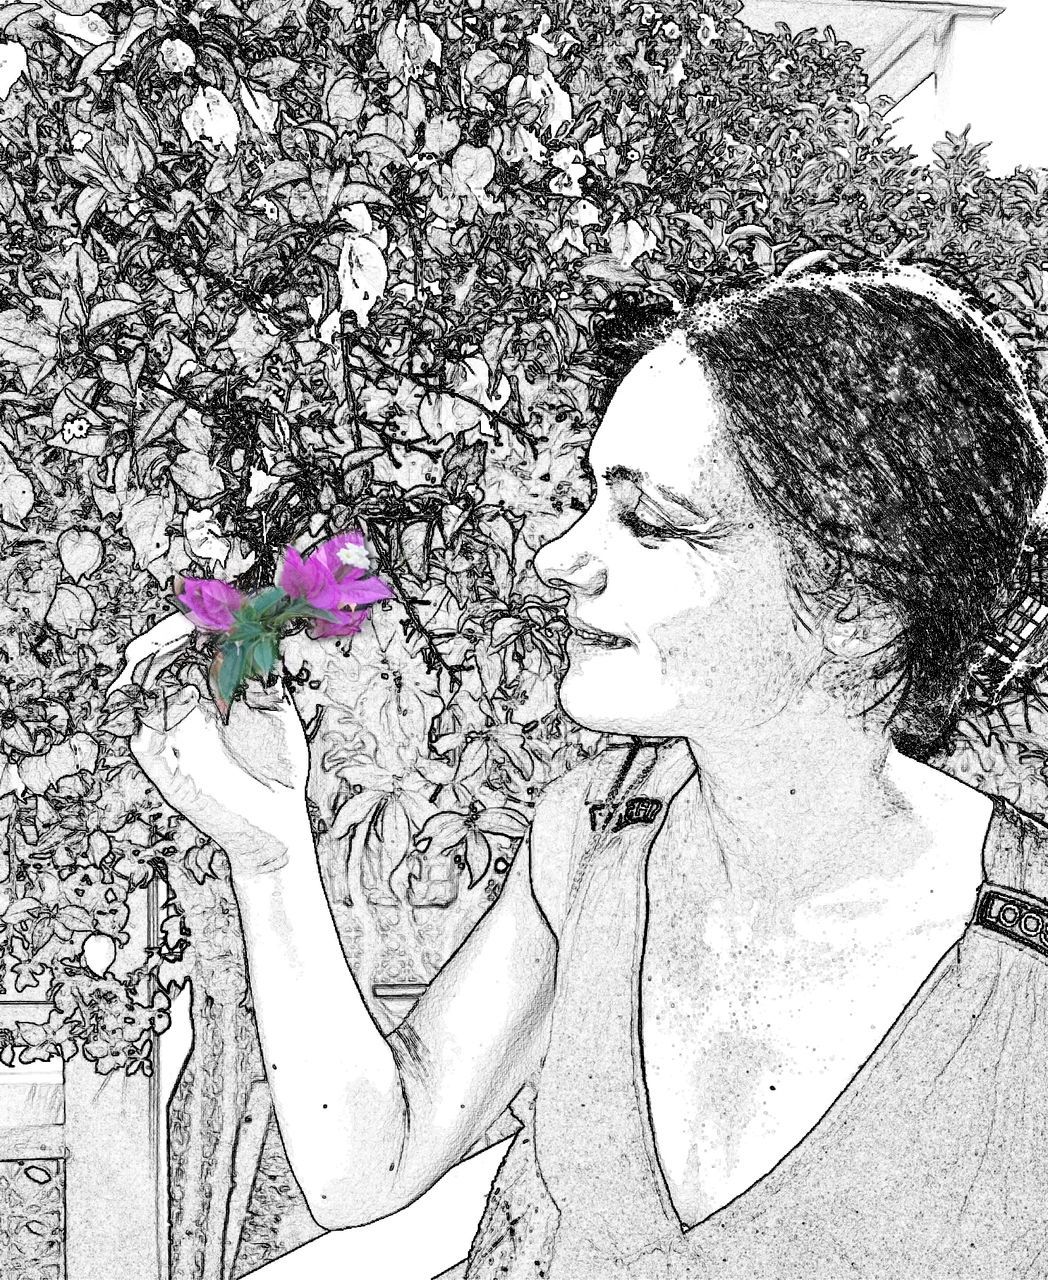 one person, plant, flowering plant, flower, young adult, women, black and white, portrait, adult, nature, cartoon, headshot, lifestyles, drawing, casual clothing, leisure activity, outdoors, monochrome photography, sketch, day, emotion, hairstyle, beauty in nature, female, looking, person, freshness, close-up